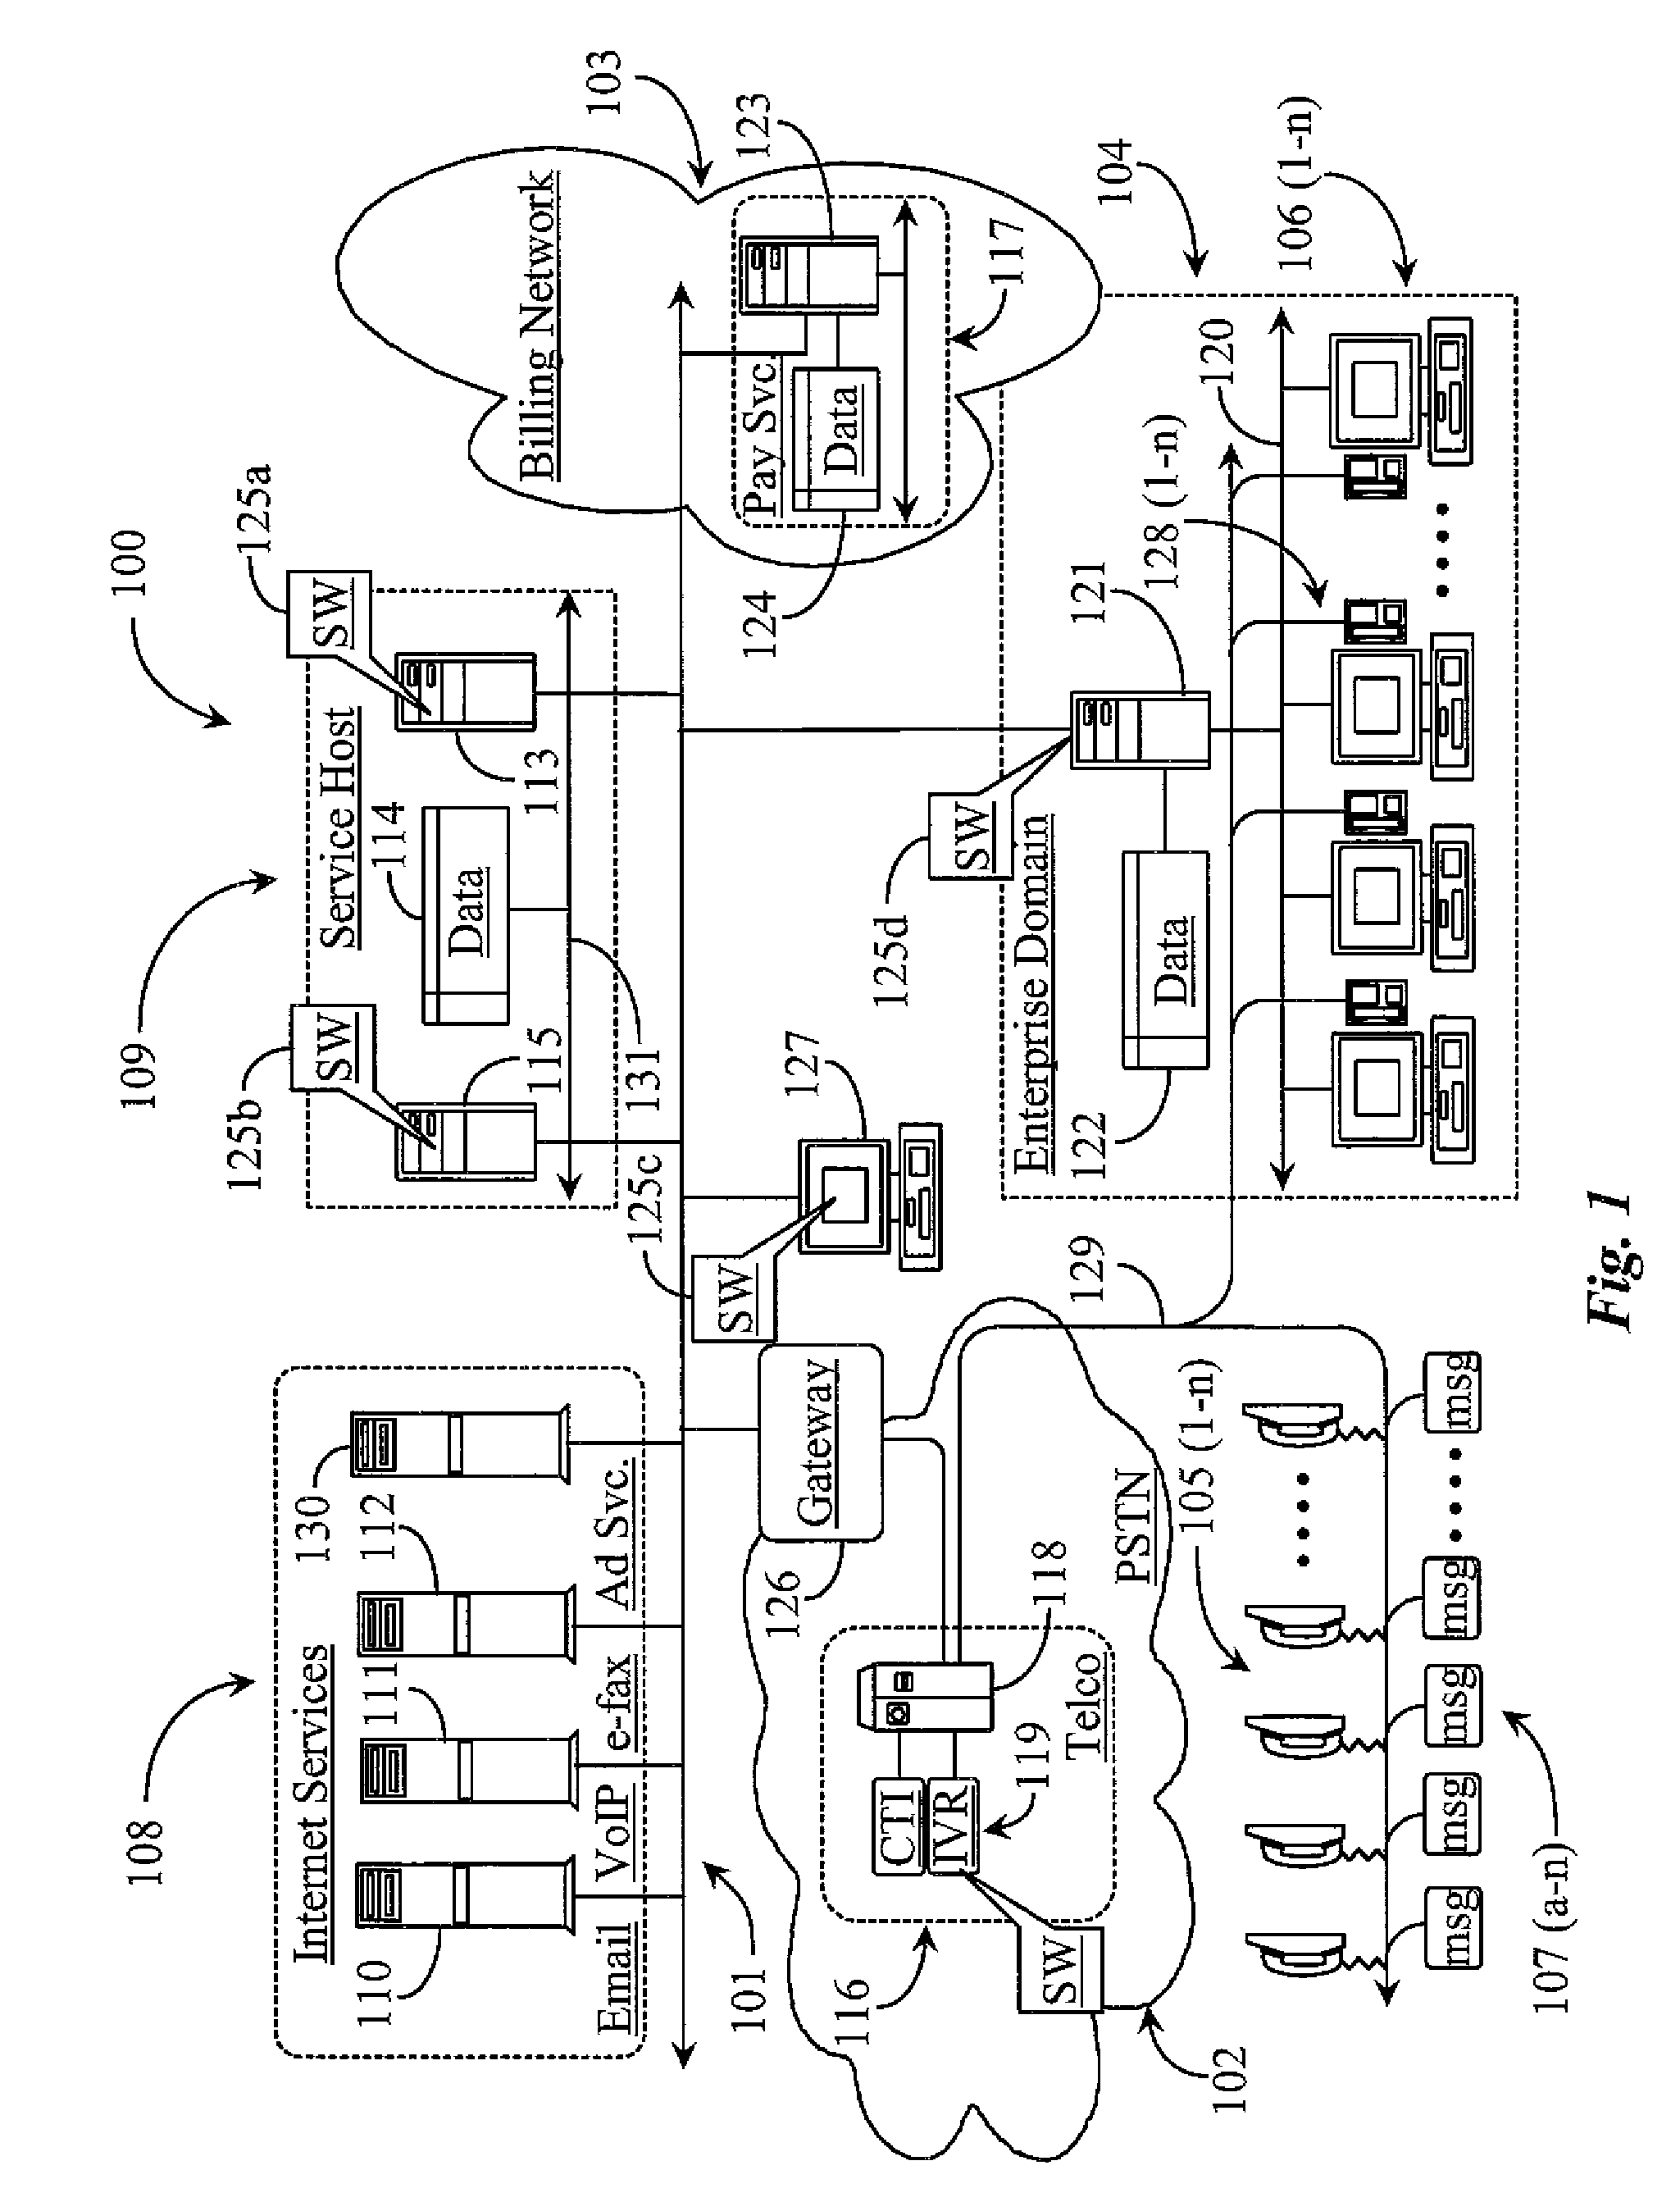 Telecommunications System for Monitoring and for Enabling a Communication Chain between Care Givers and Benefactors and for Providing Alert Notification to Designated Recipients